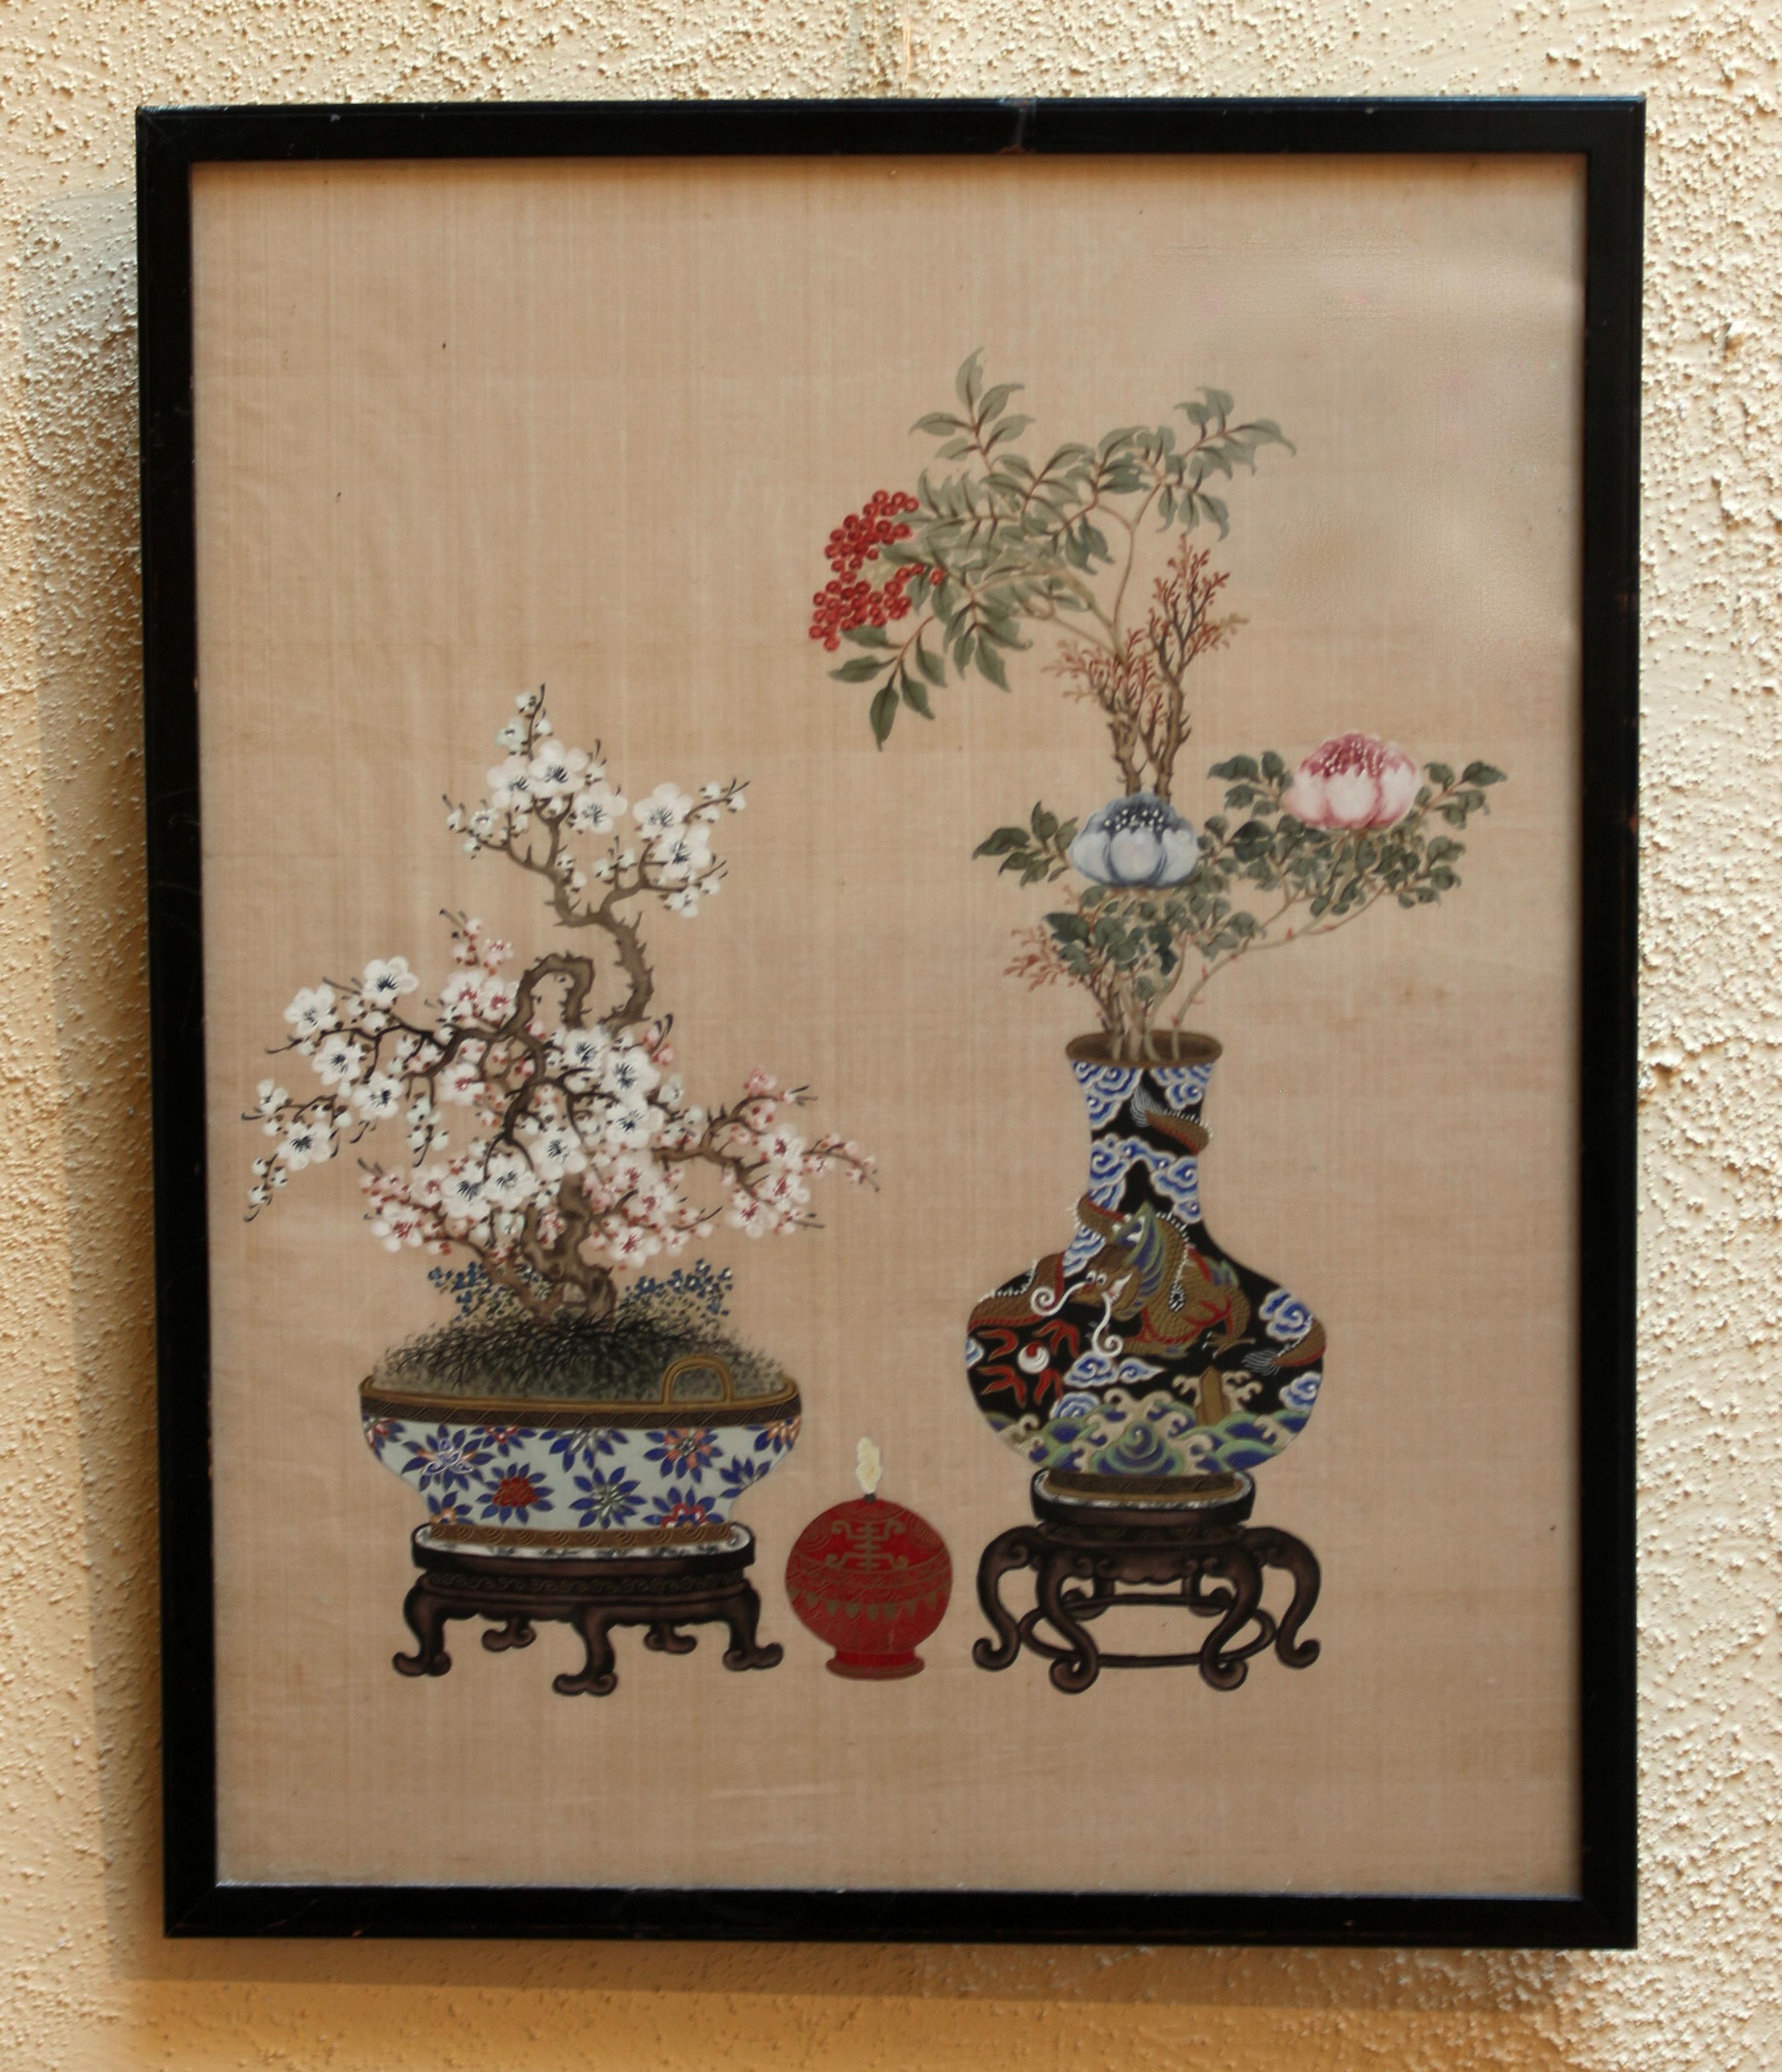 Elegant antique Chinese painting on silk, featuring a bowl with prunus bonsai tree and a vase of entwined dragons with Spring branches. Needing re-framing. 15 3/4